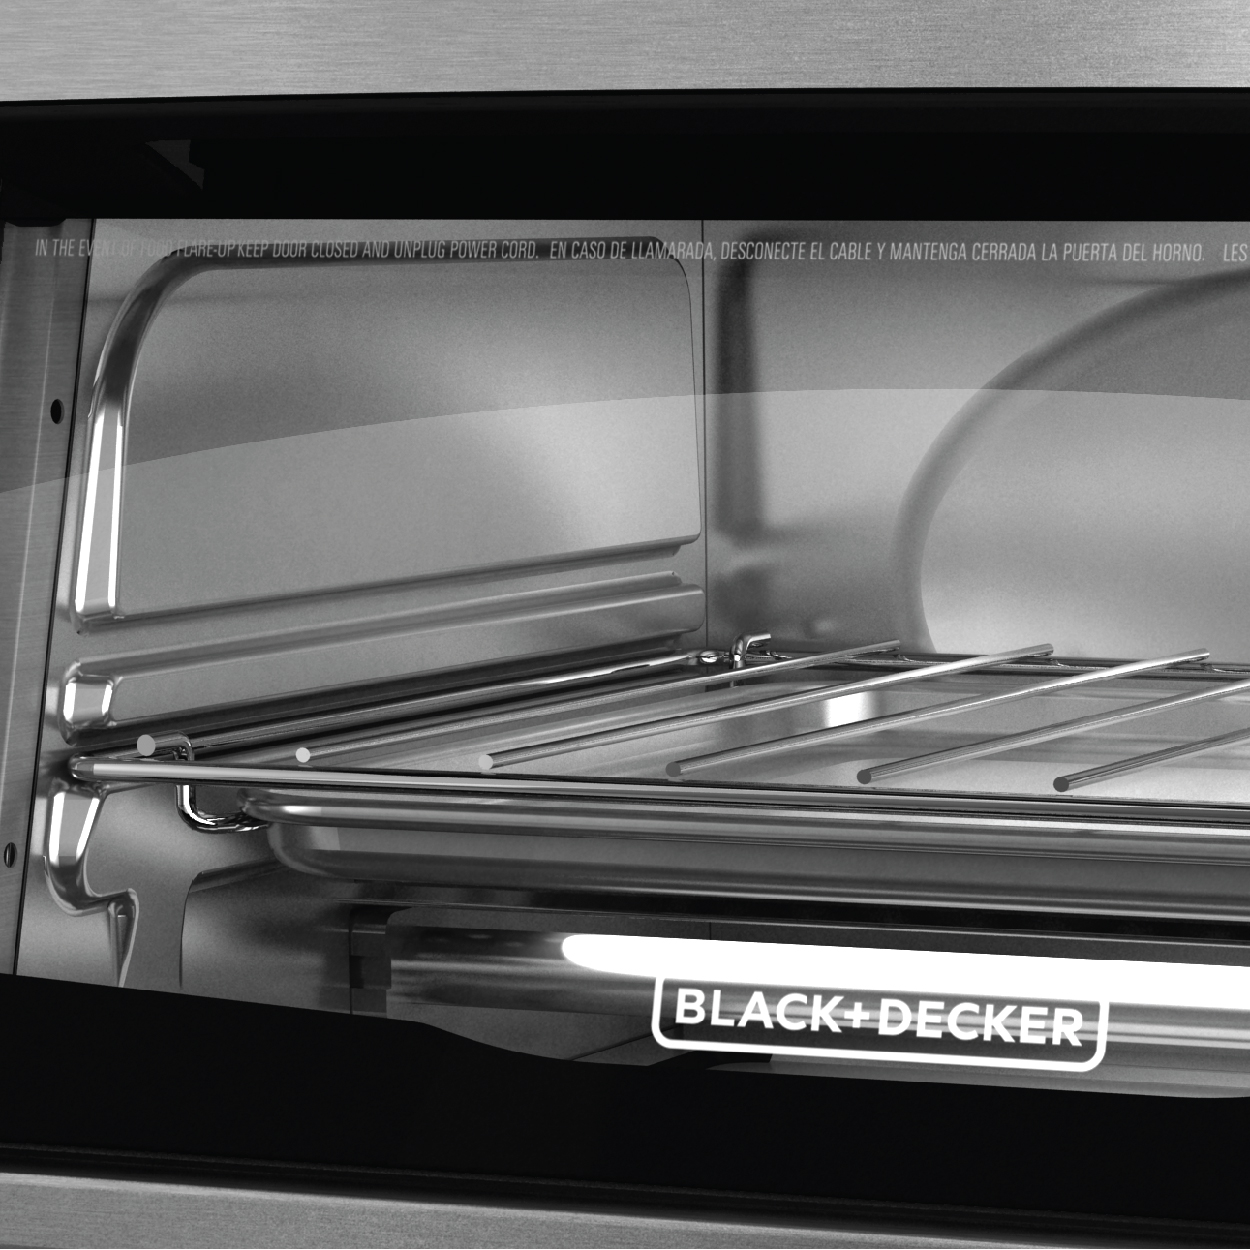 Black & Decker 4 Slice Stainless Steel Toaster Oven - image 4 of 12